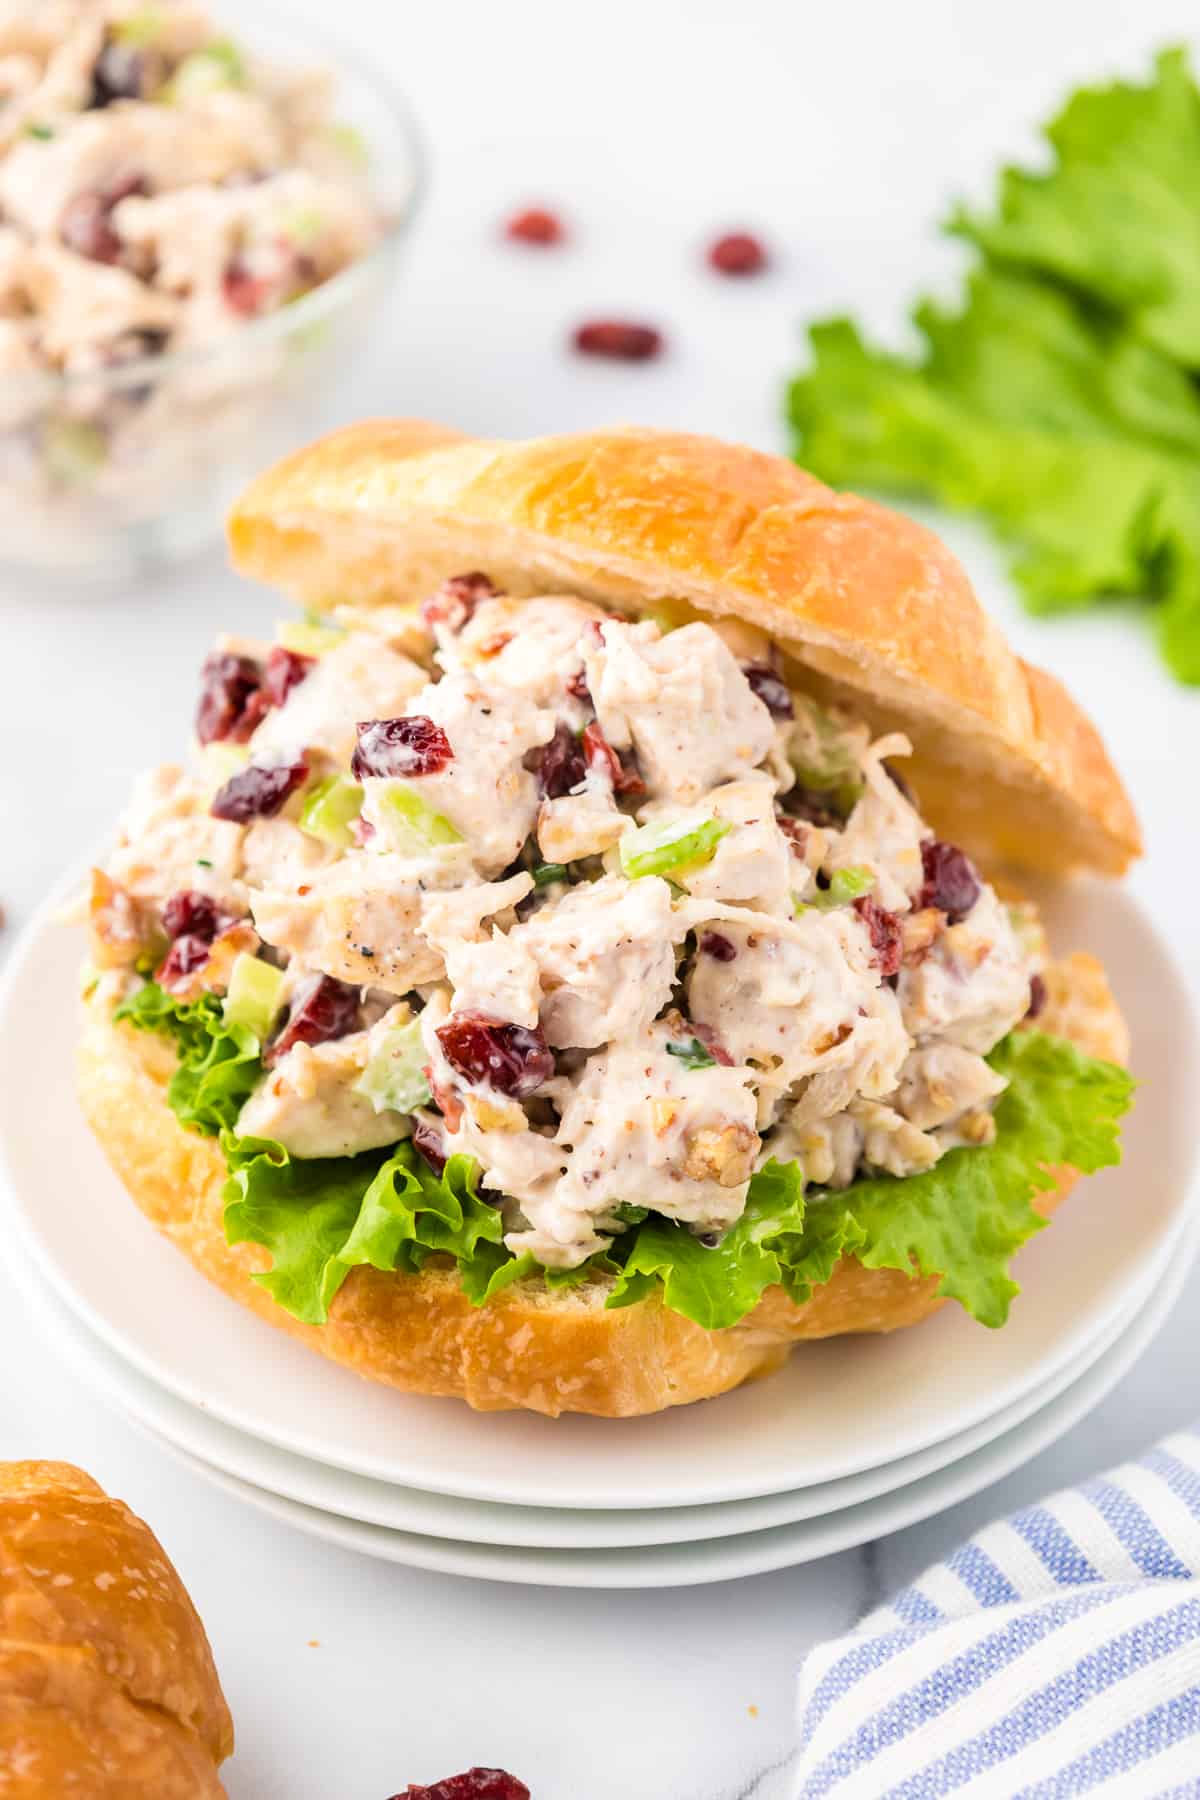 Cranberry Pecan Chicken Salad piled high on a croissant with lettuce to make a sandwich on a plate.